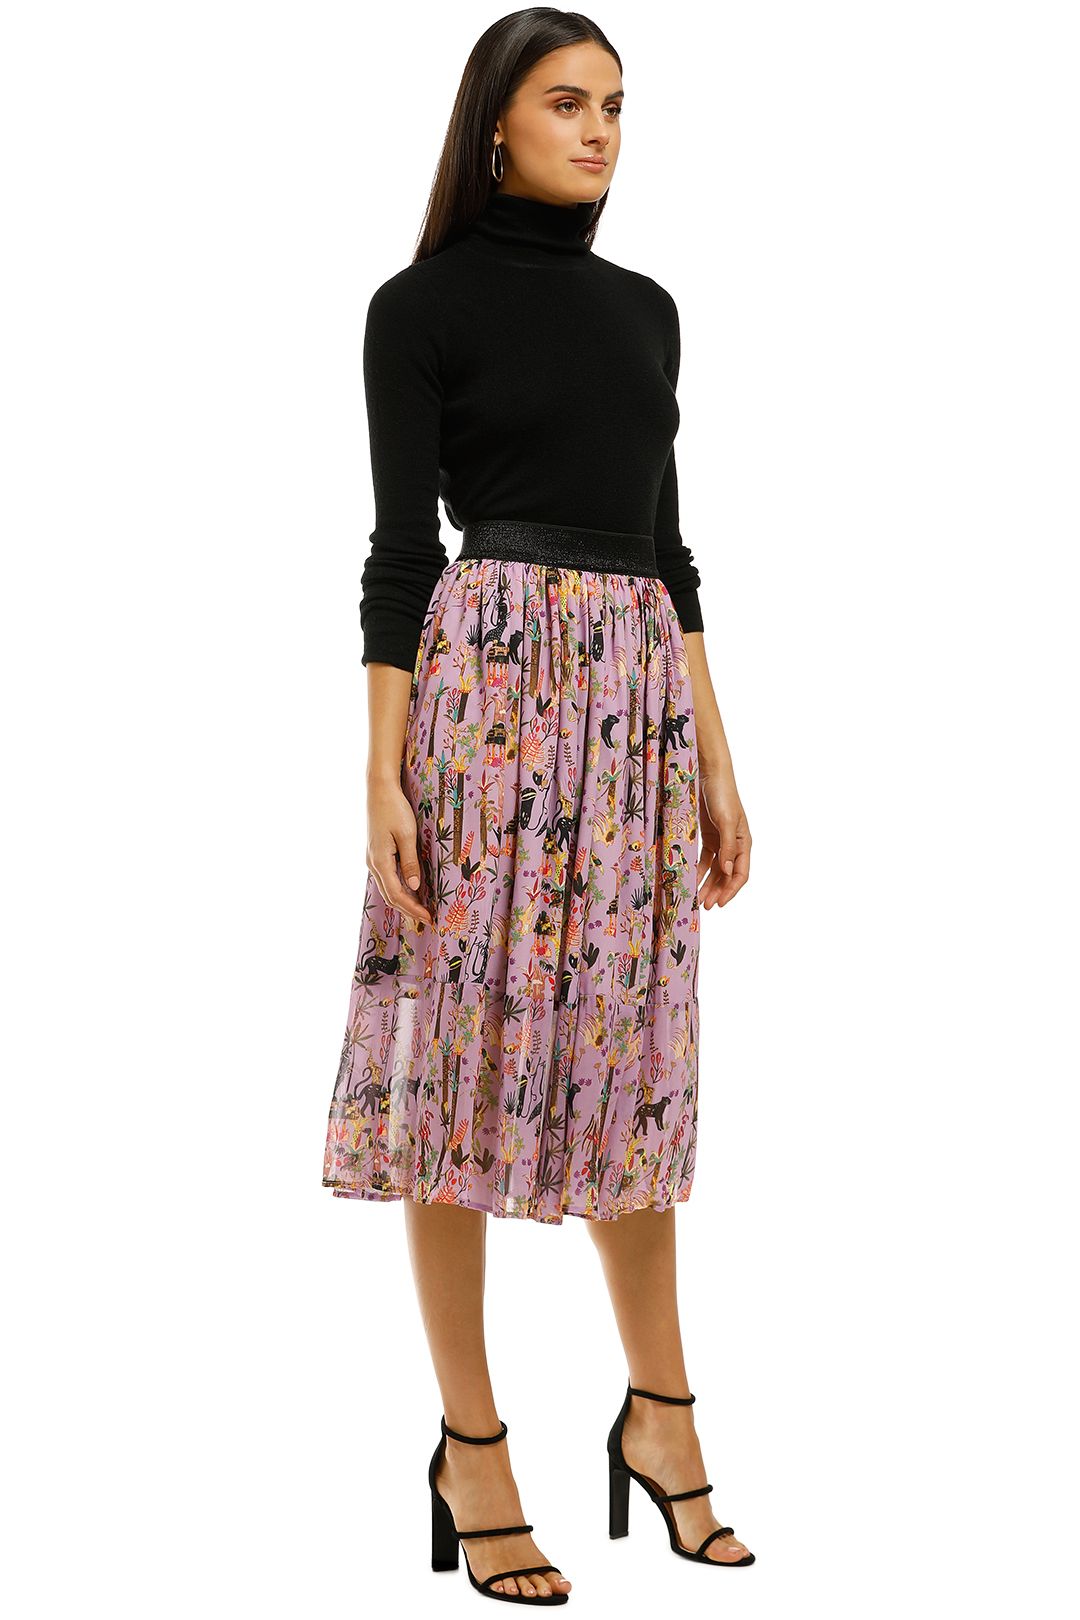 Curate-by-Trelise-Cooper-Skirt-Of-Art-Skirt-Lilac-Side